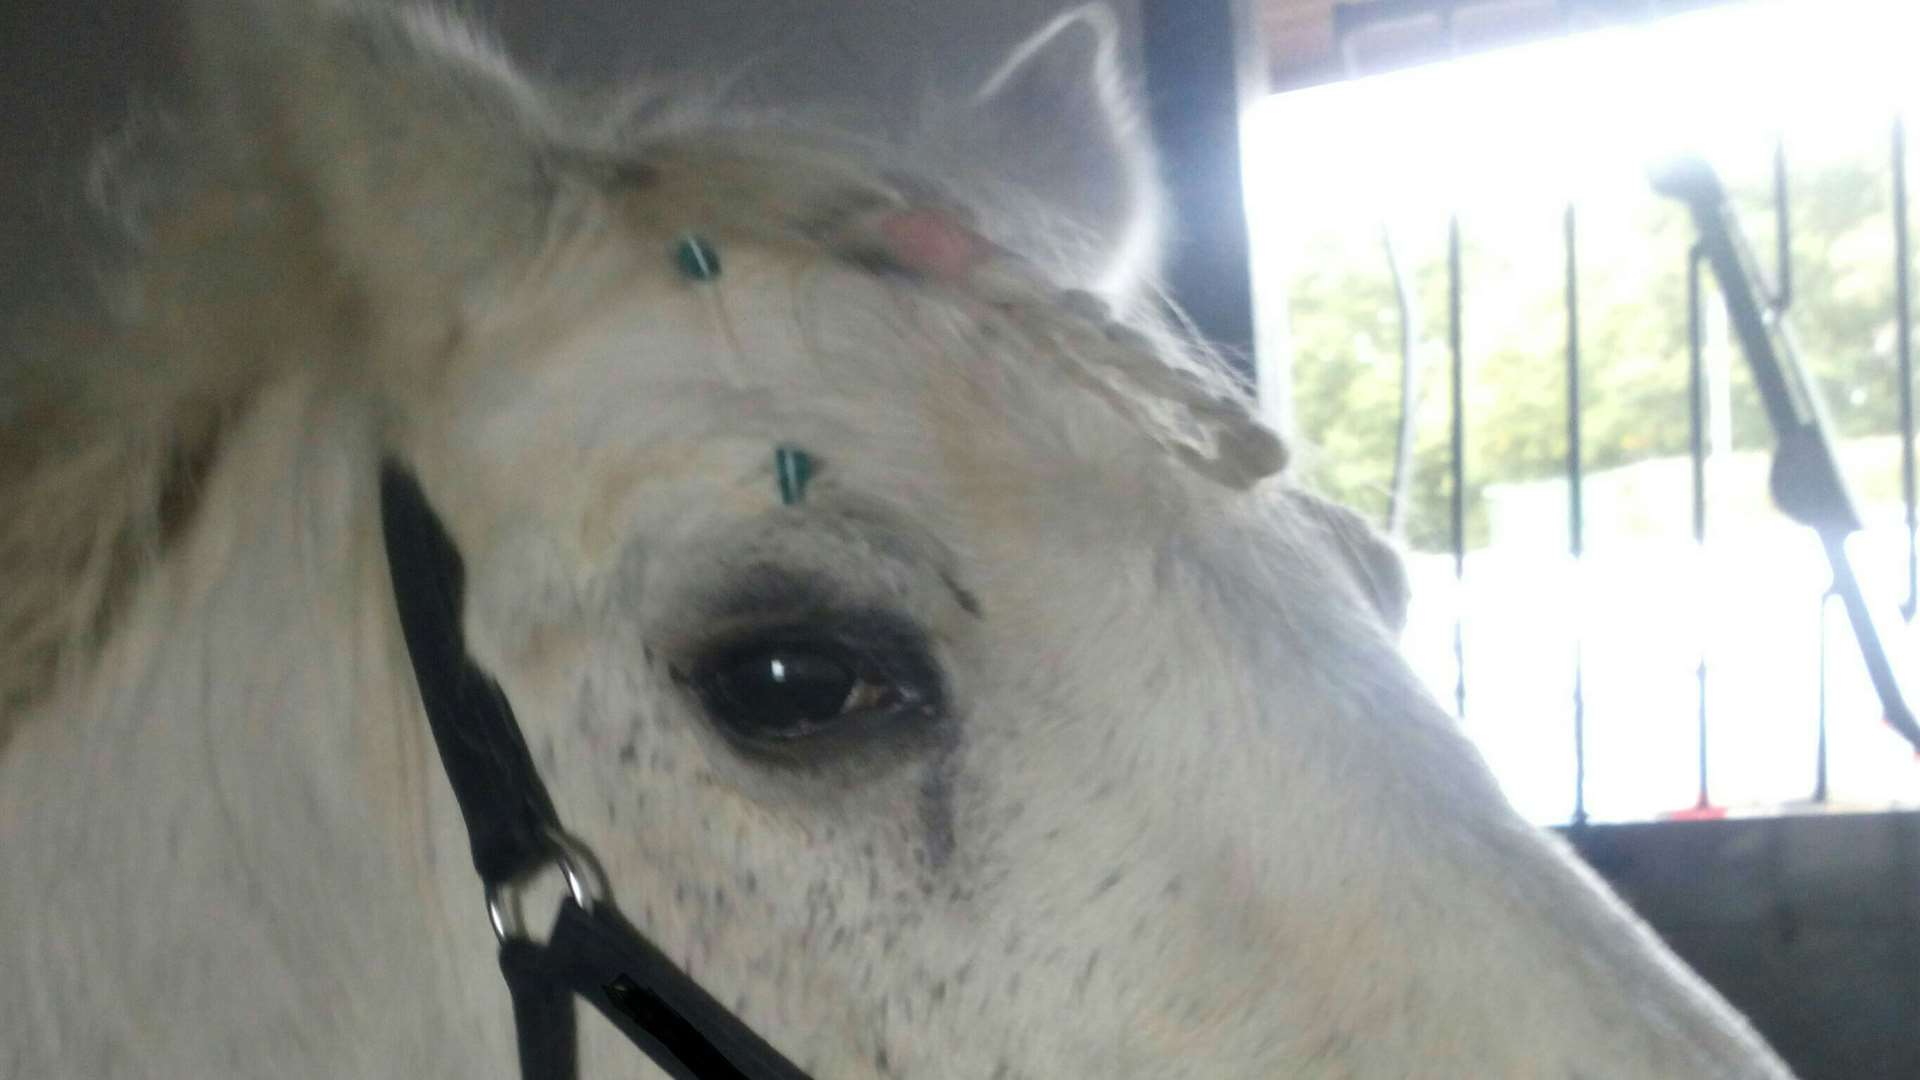 Silver's right eye could requires drastic surgery.